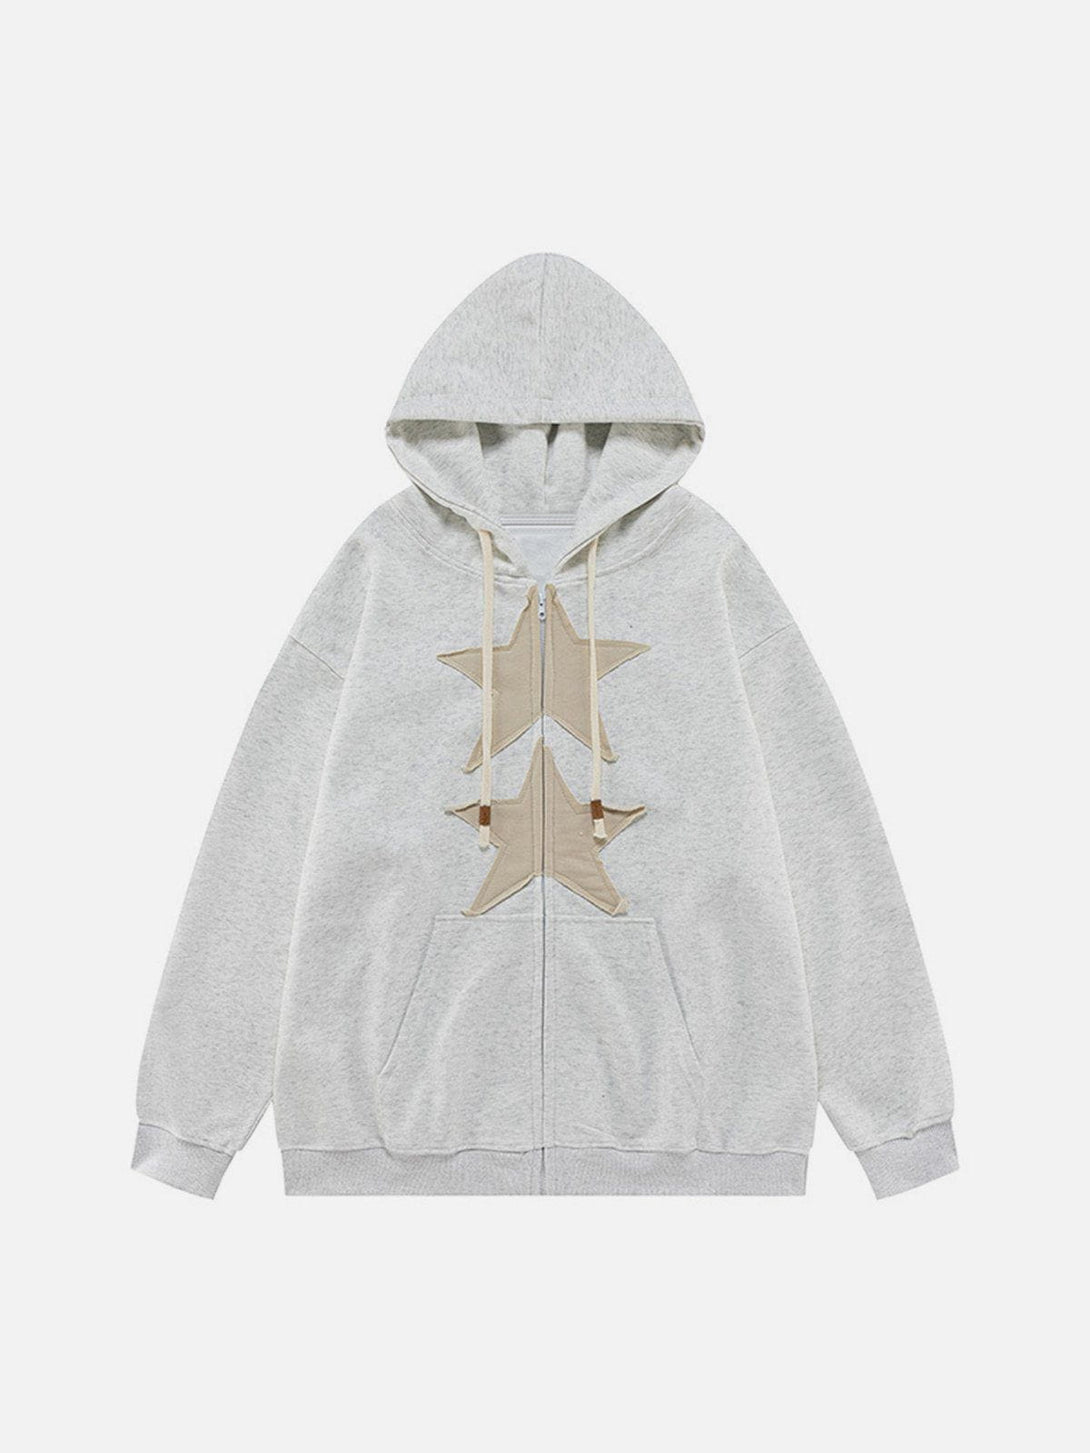 Majesda® - Embroidery Star Zip Up Hoodie outfit ideas streetwear fashion